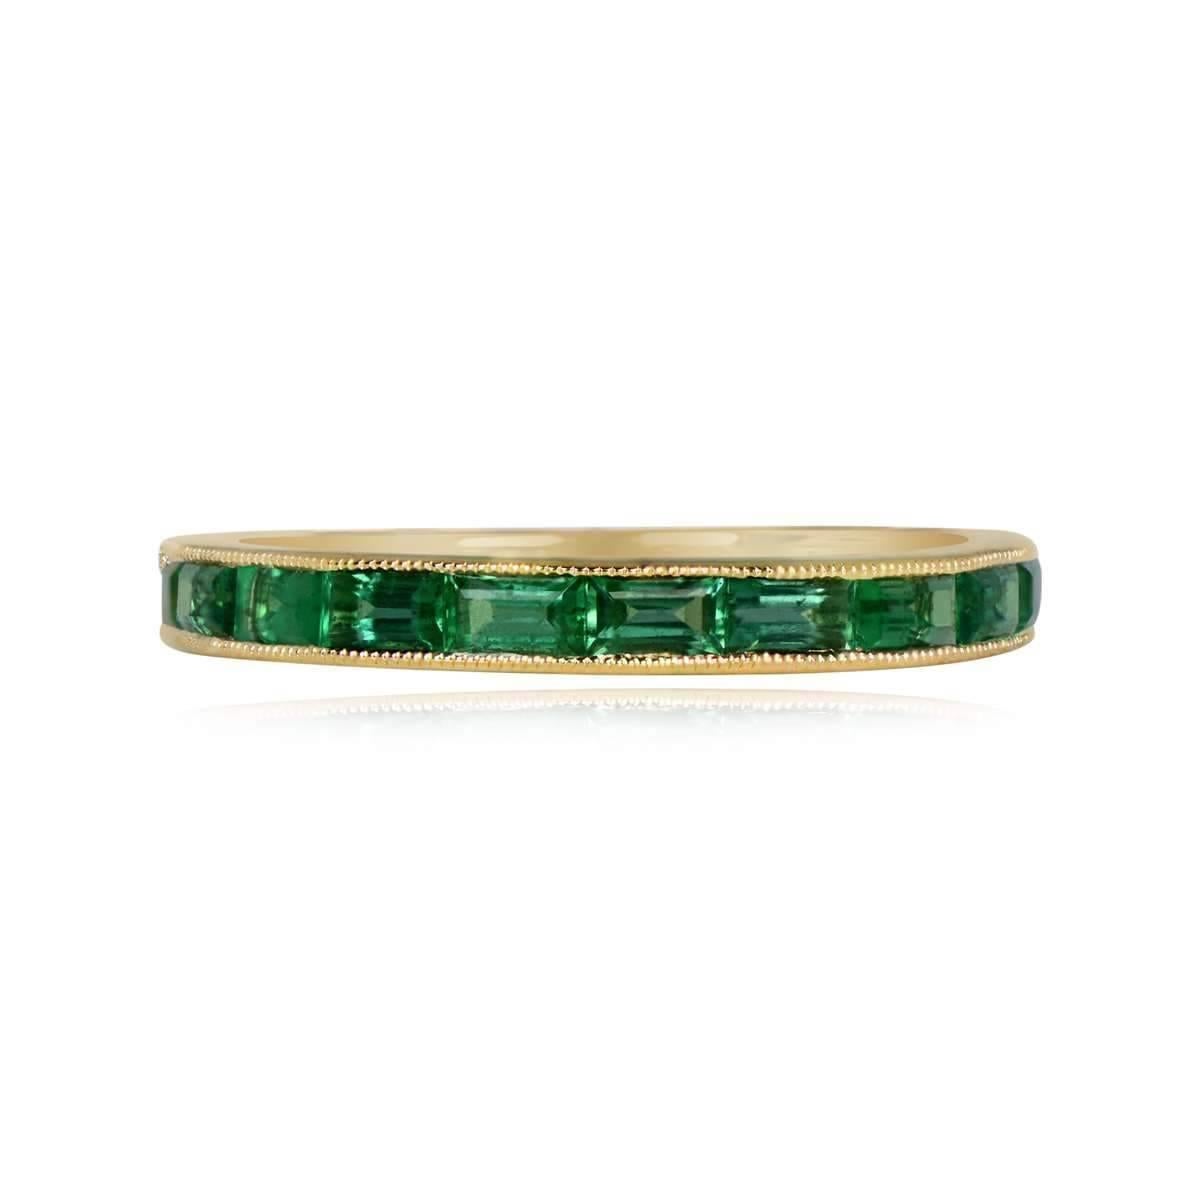 A stunning half-eternity band in 18k yellow gold, featuring natural baguette-cut green emeralds set east-west with a total weight of approximately 0.73 carats. The emeralds are channel-set and adorned with fine milgrain detailing around the bezels.